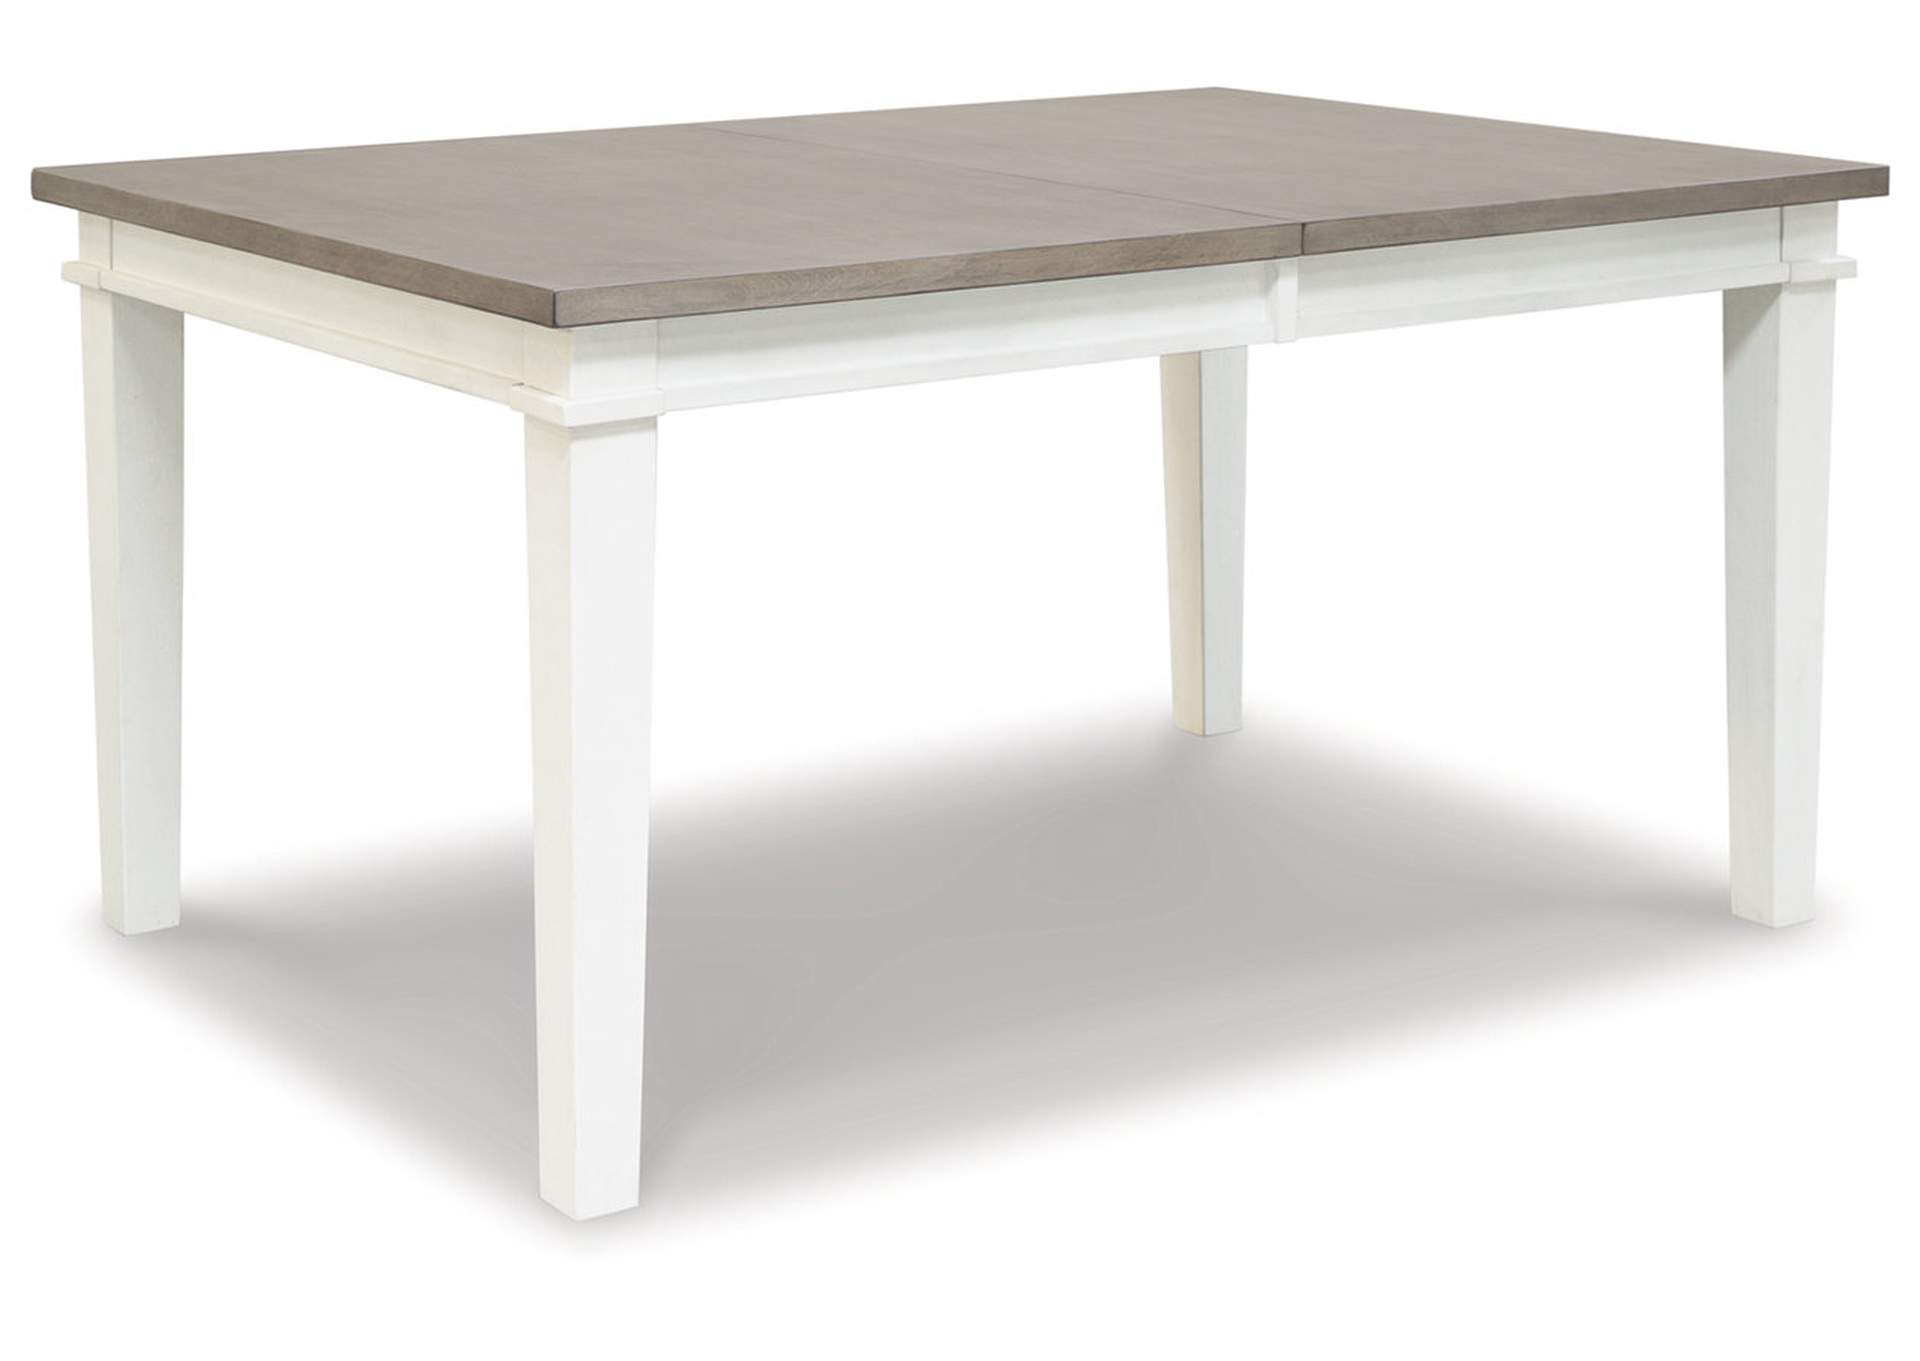 Nollicott Dining Extension Table,Benchcraft